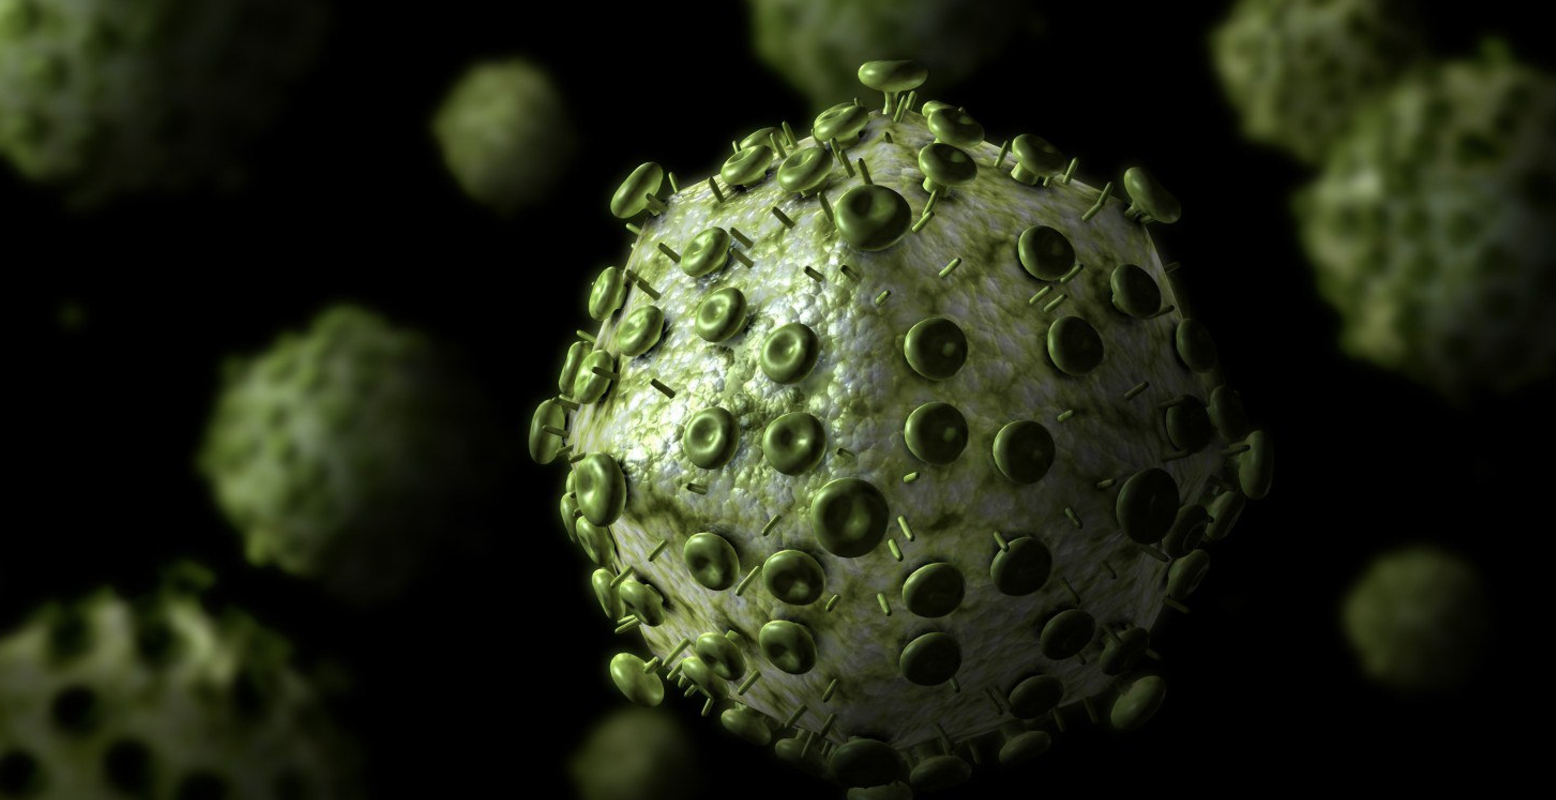 Antibody discovered which can neutralise most HIV strains